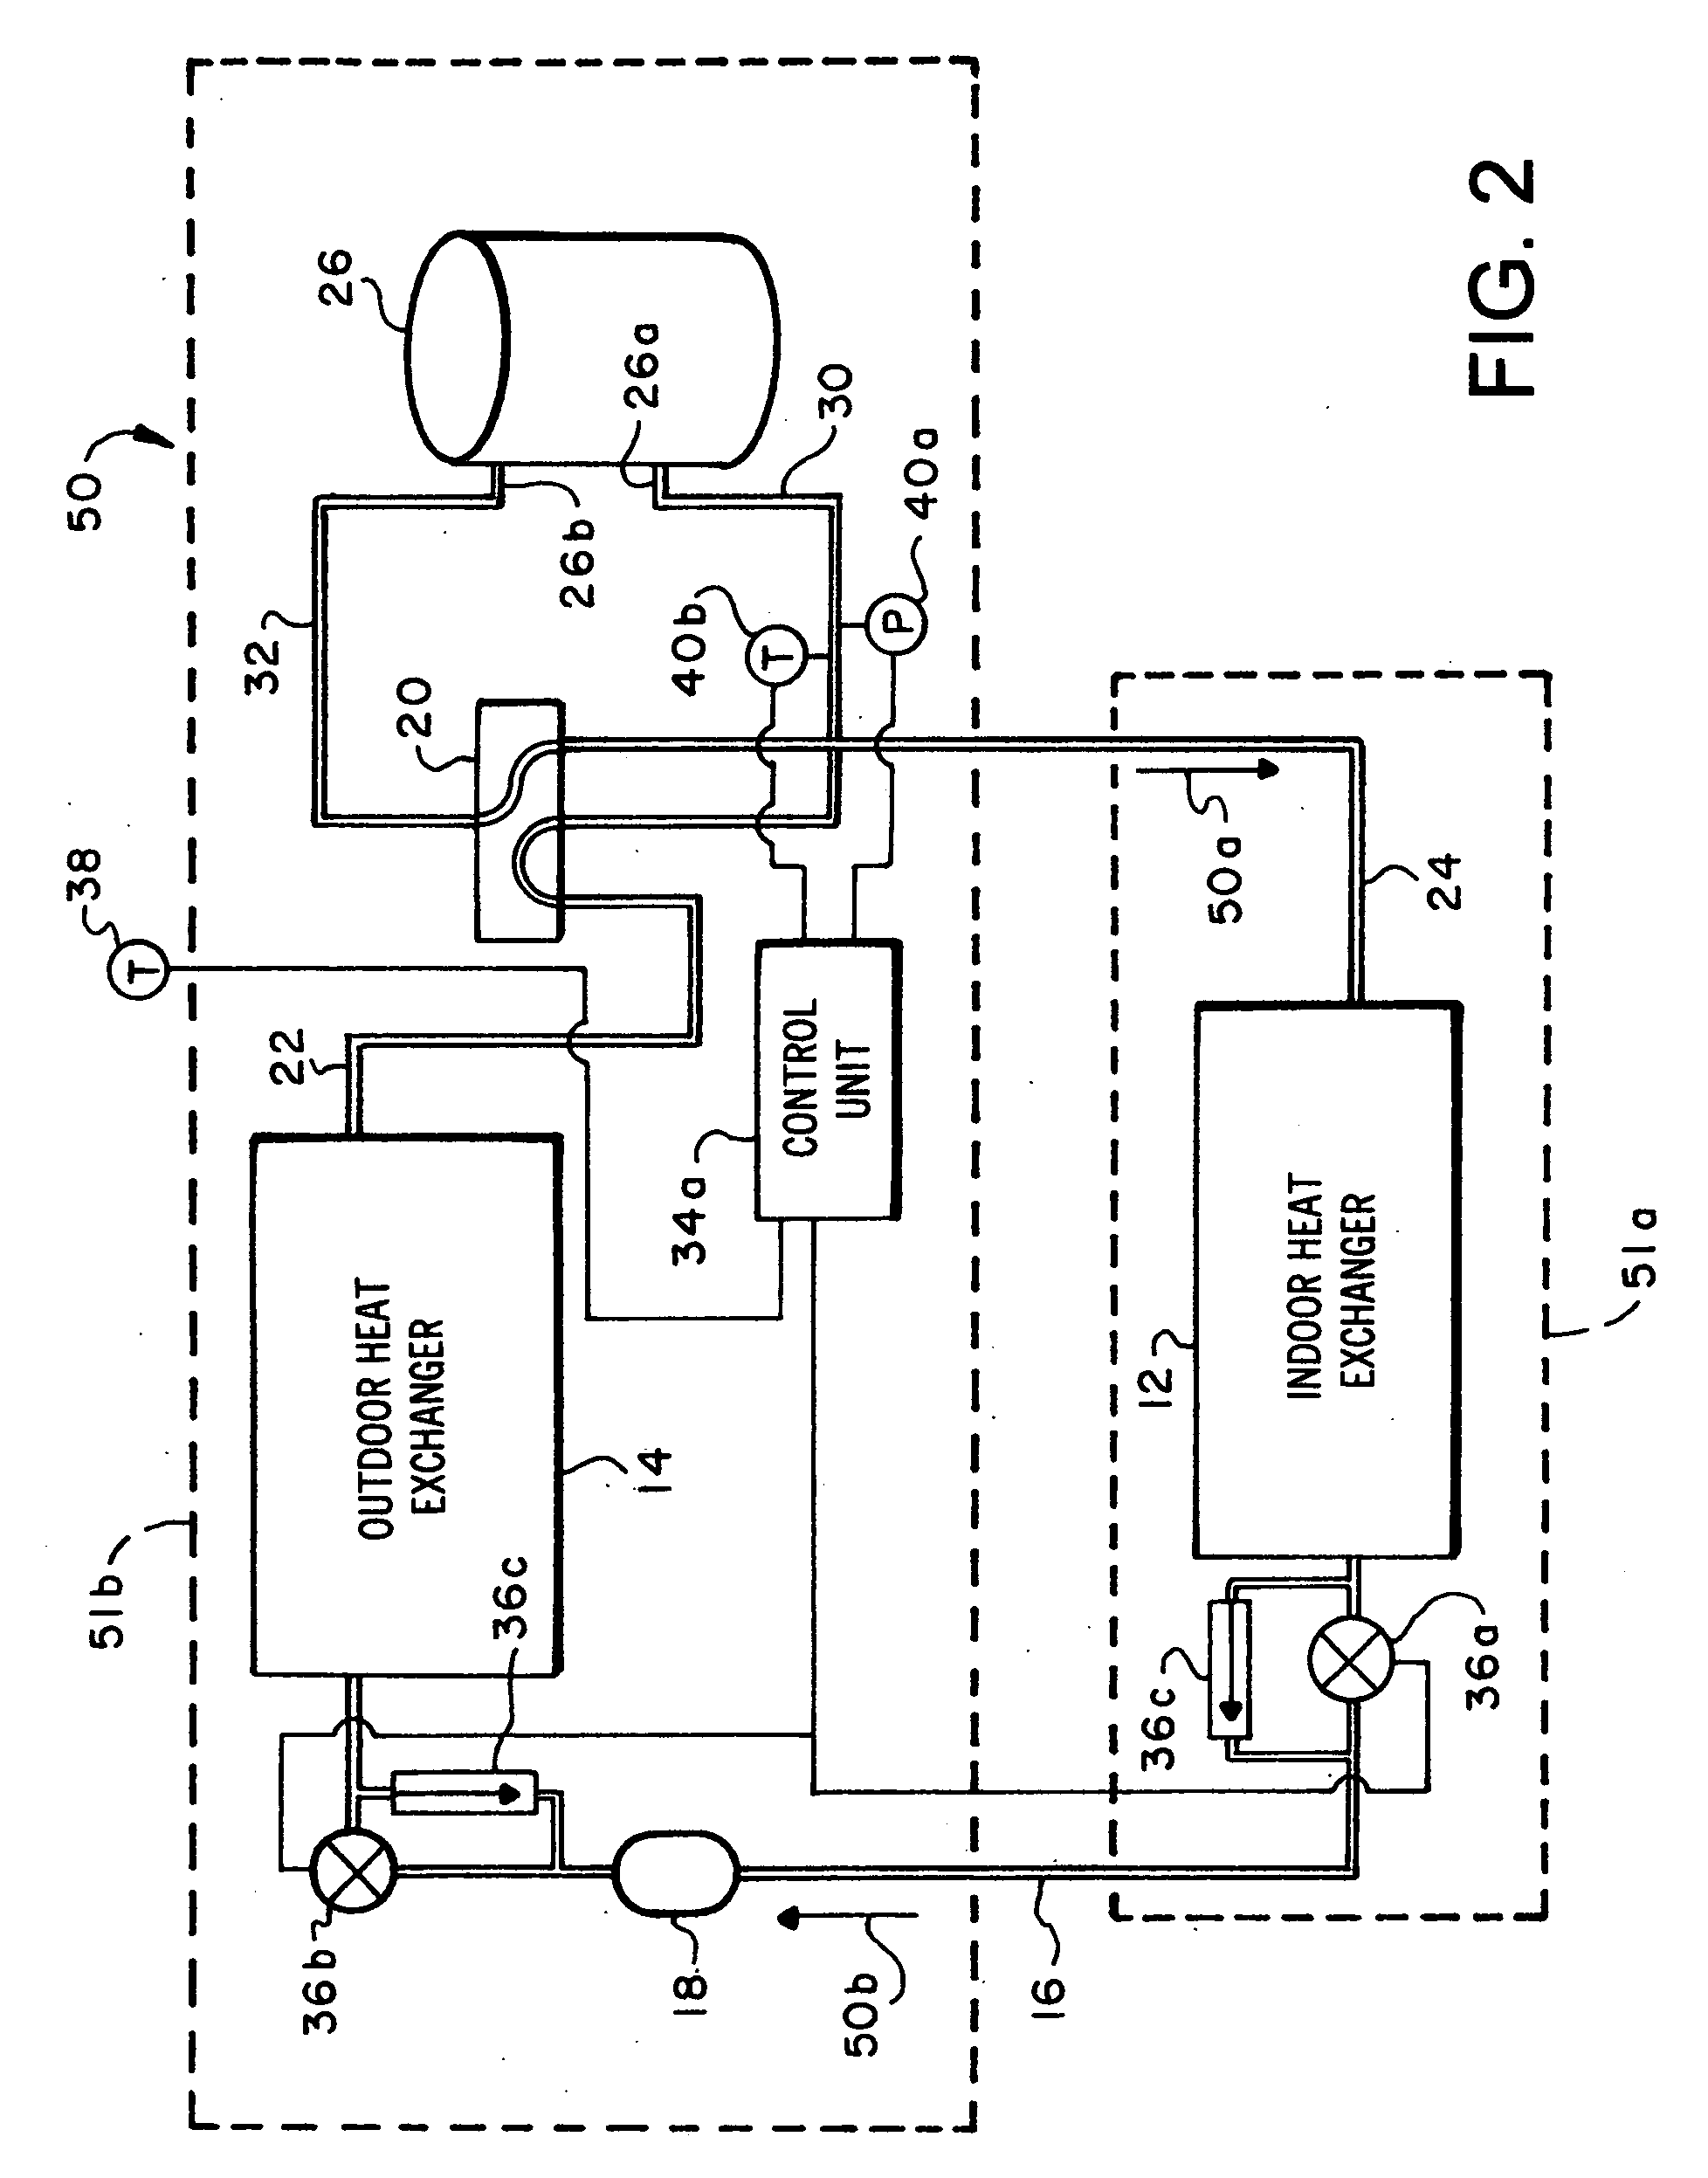 Expansion valve control system and method for air conditioning apparatus